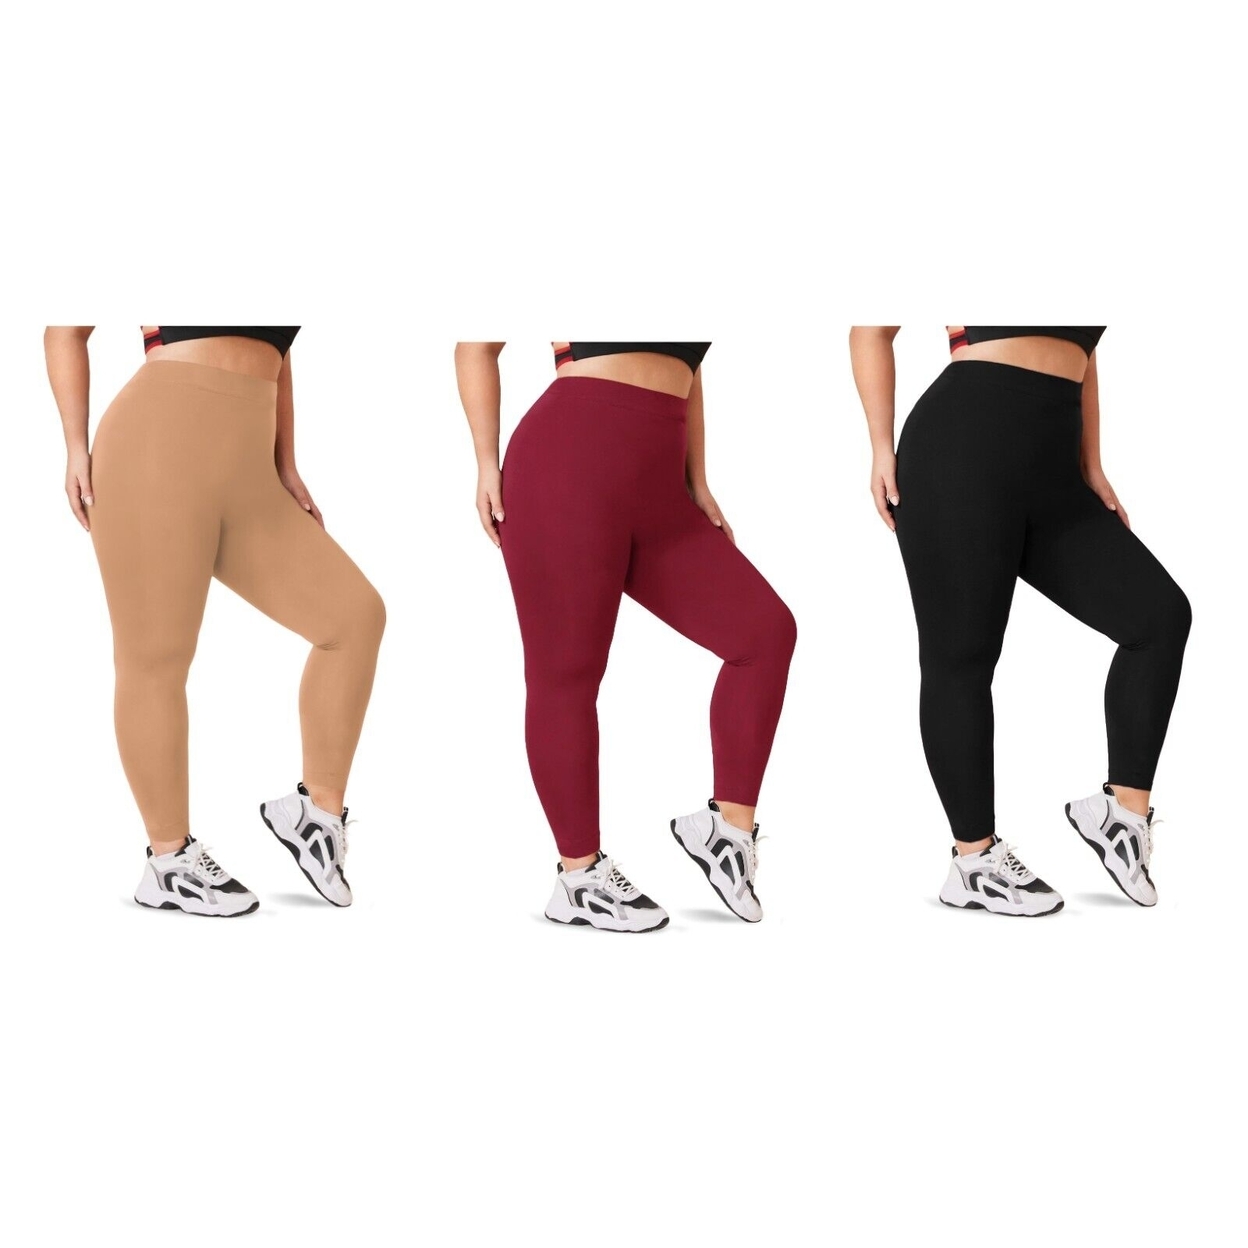 2-Pack: Women's Casual Ultra-Soft Smooth High Waisted Athletic Active Yoga Leggings Plus Size Available - Black & Black, 2x